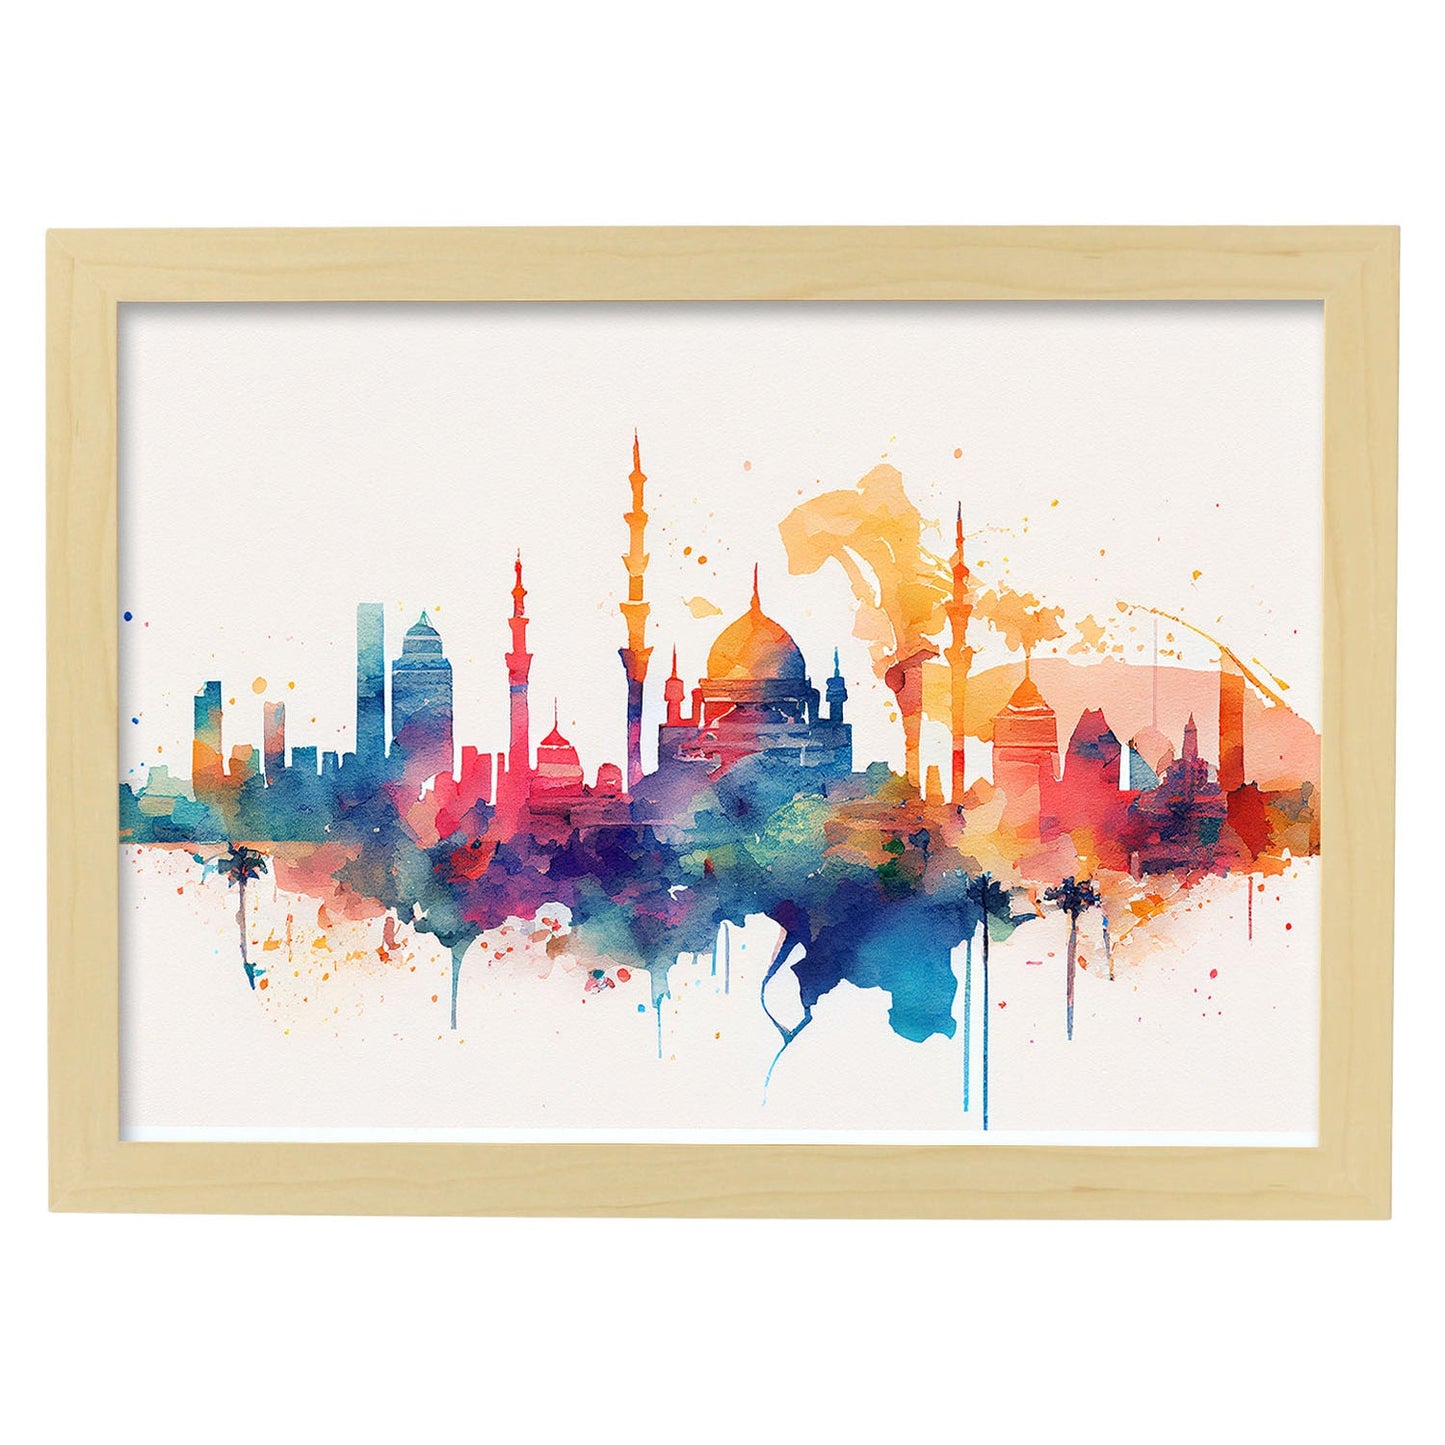 Nacnic watercolor of a skyline of the city of Cairo. Aesthetic Wall Art Prints for Bedroom or Living Room Design.-Artwork-Nacnic-A4-Marco Madera Clara-Nacnic Estudio SL